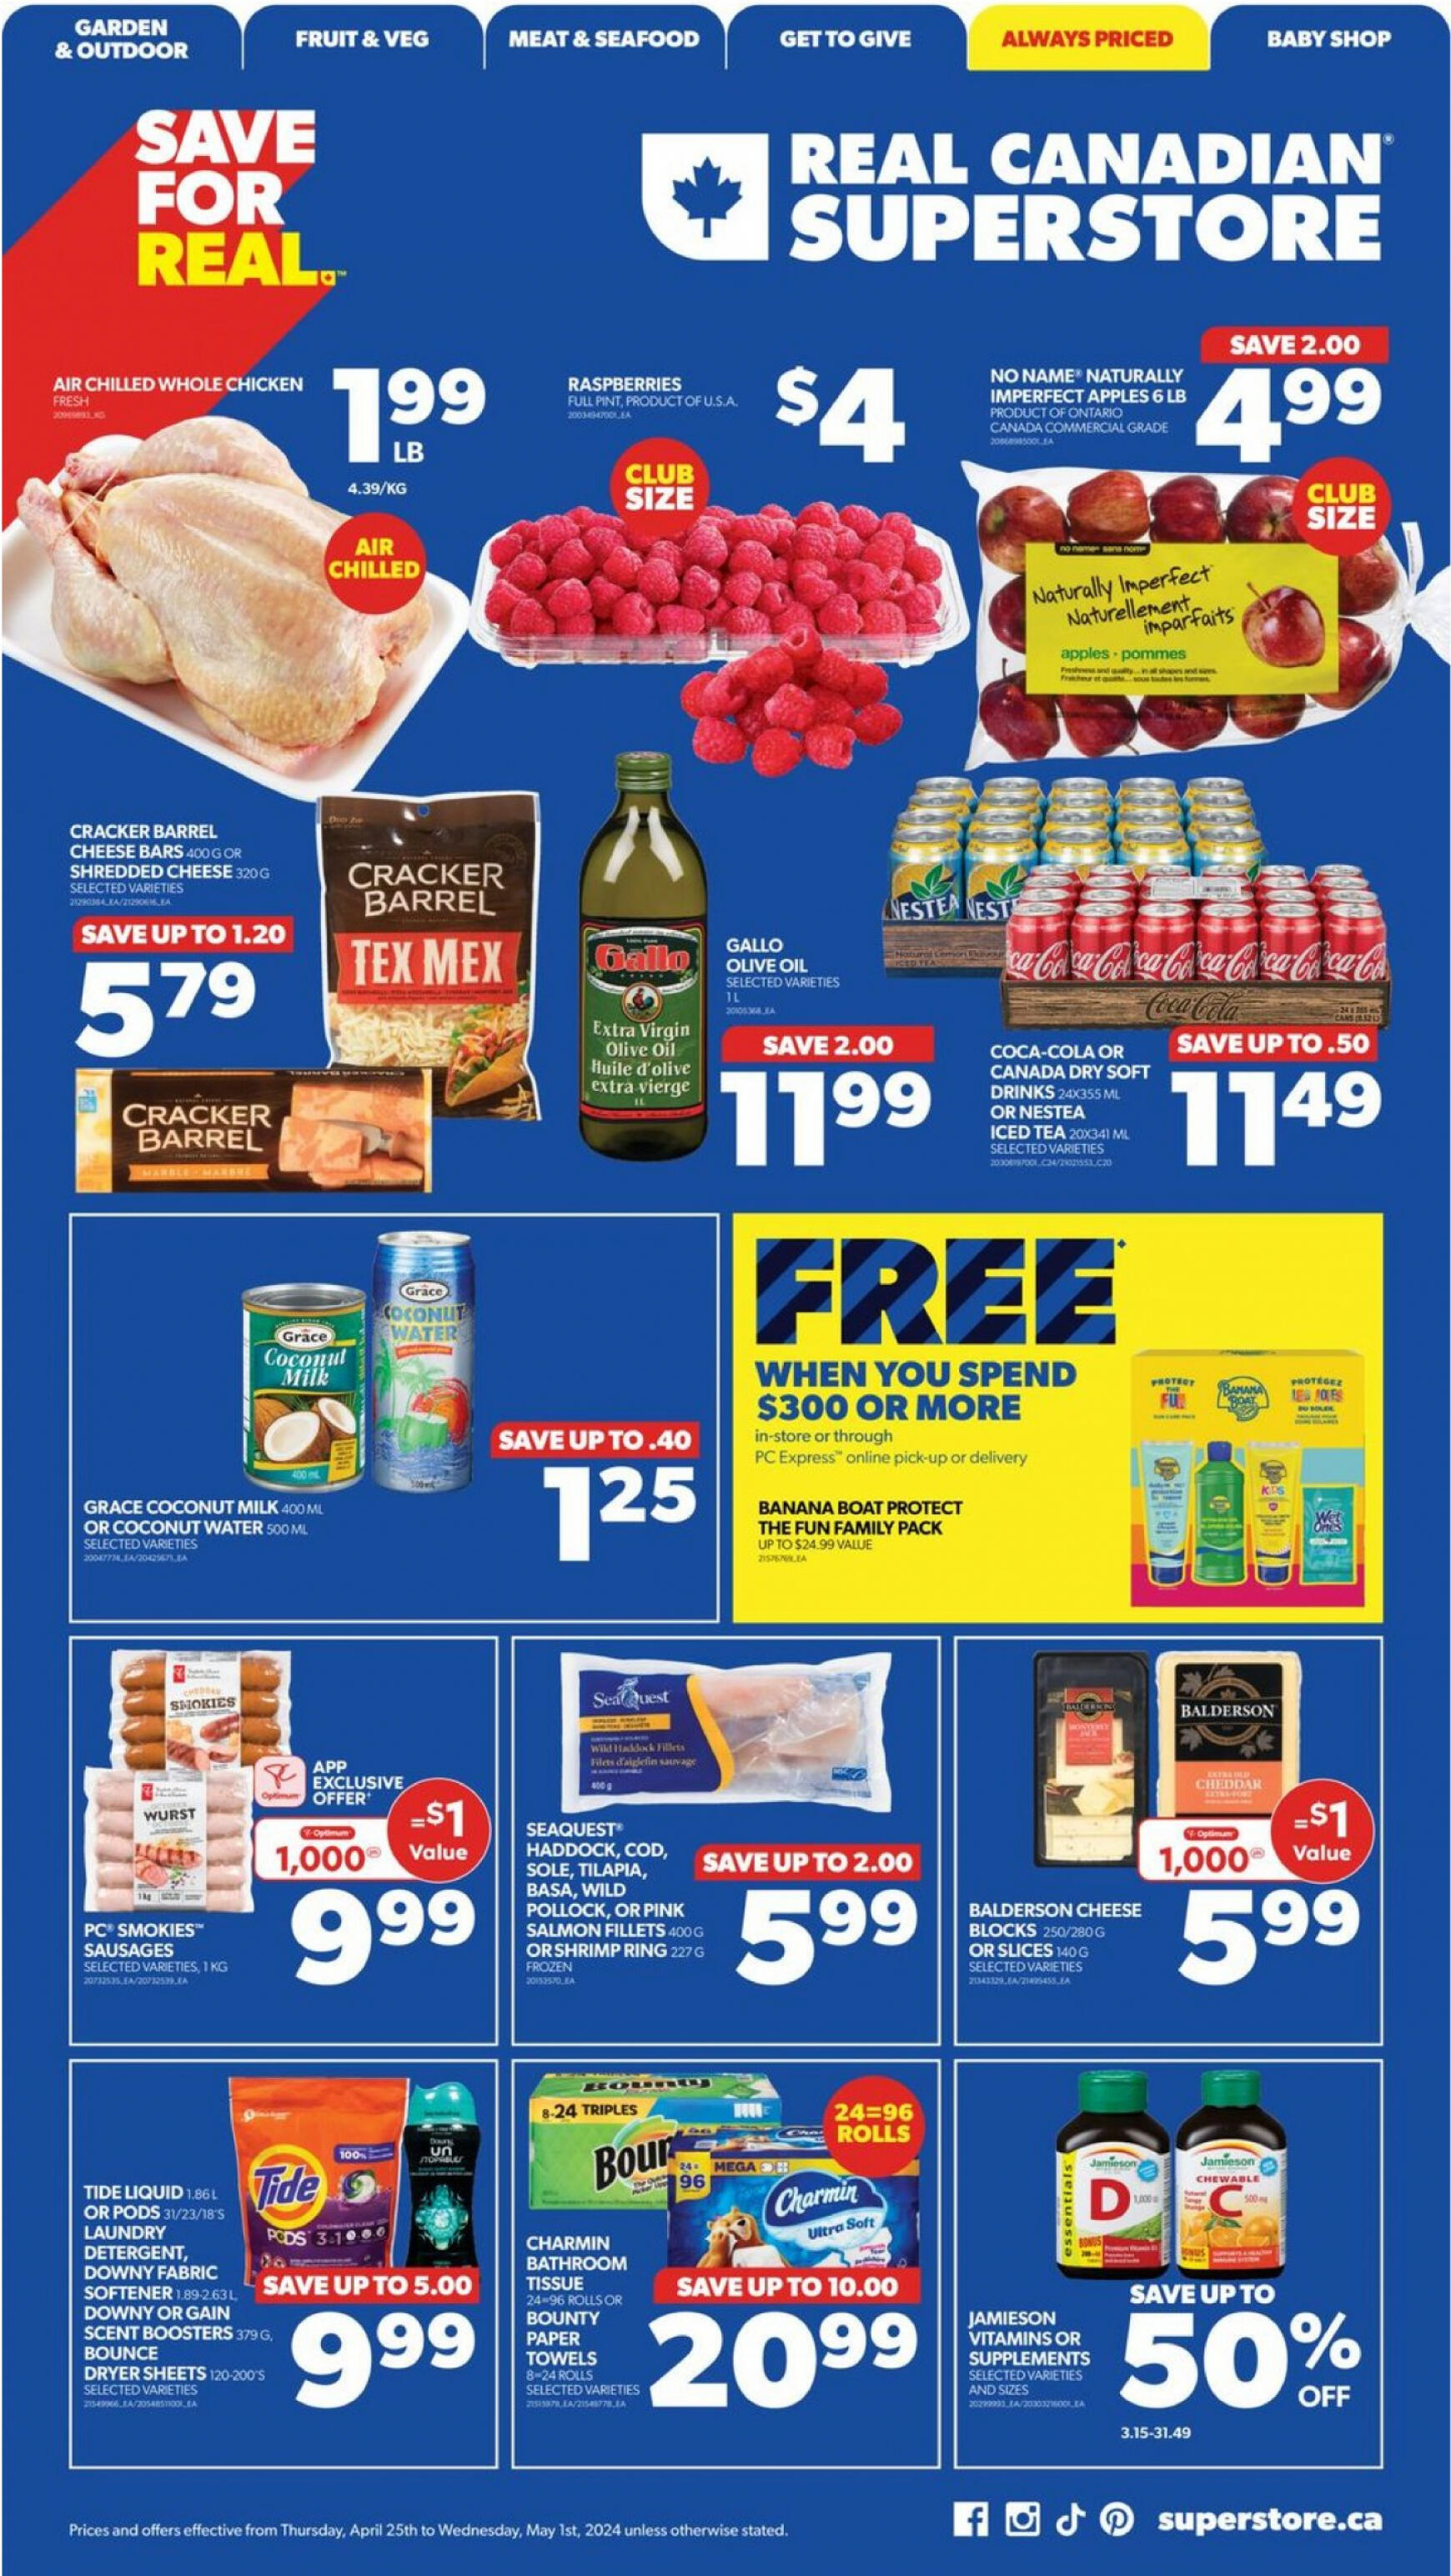 real-canadian-superstore - Real Canadian Superstore flyer current 01.05. - 31.05. - page: 2